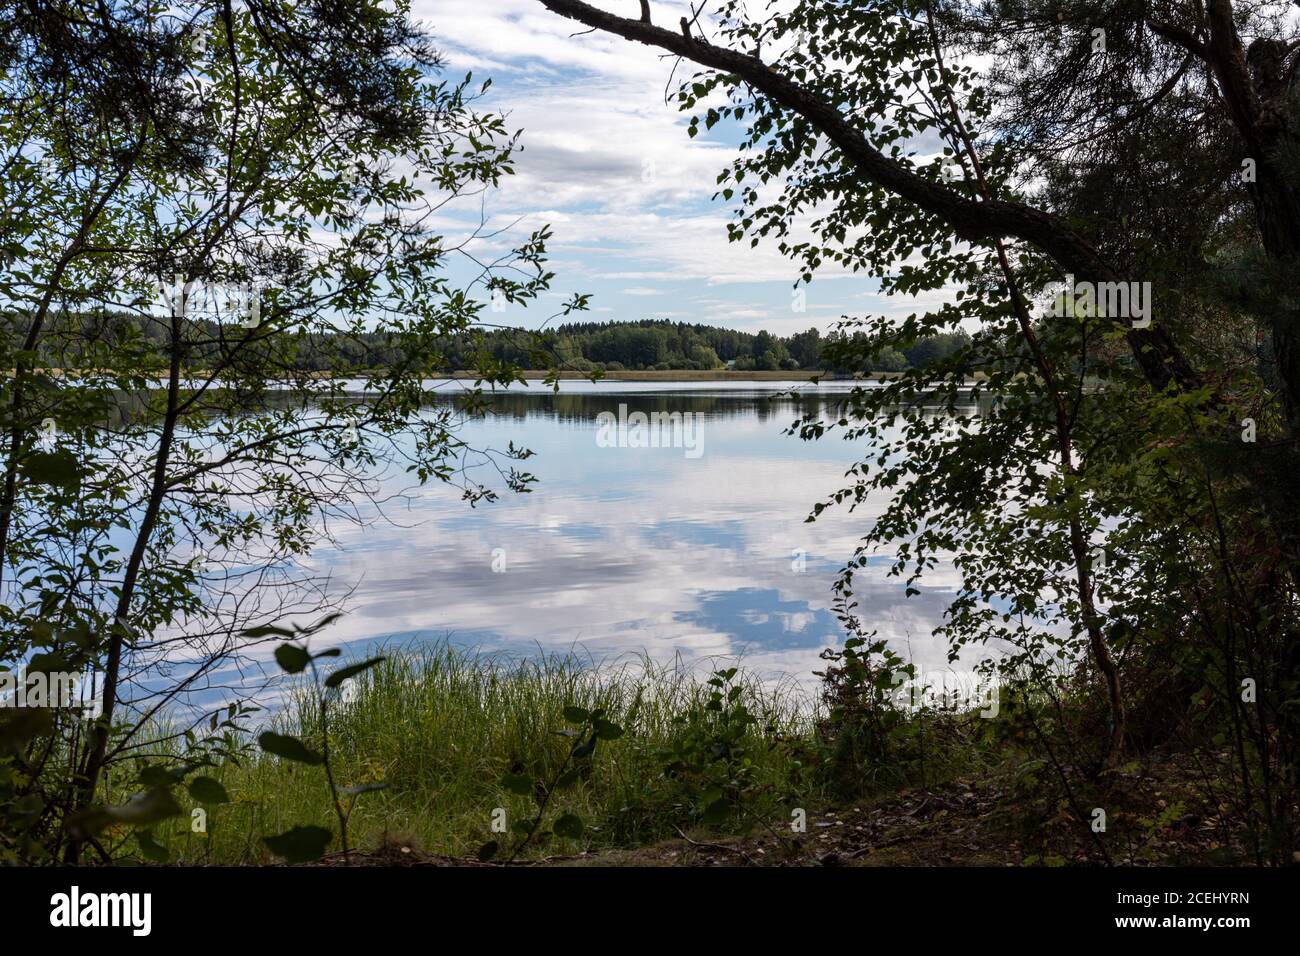 Sky and clouds reflection in serene lake. Finnish nature view. Stock Photo